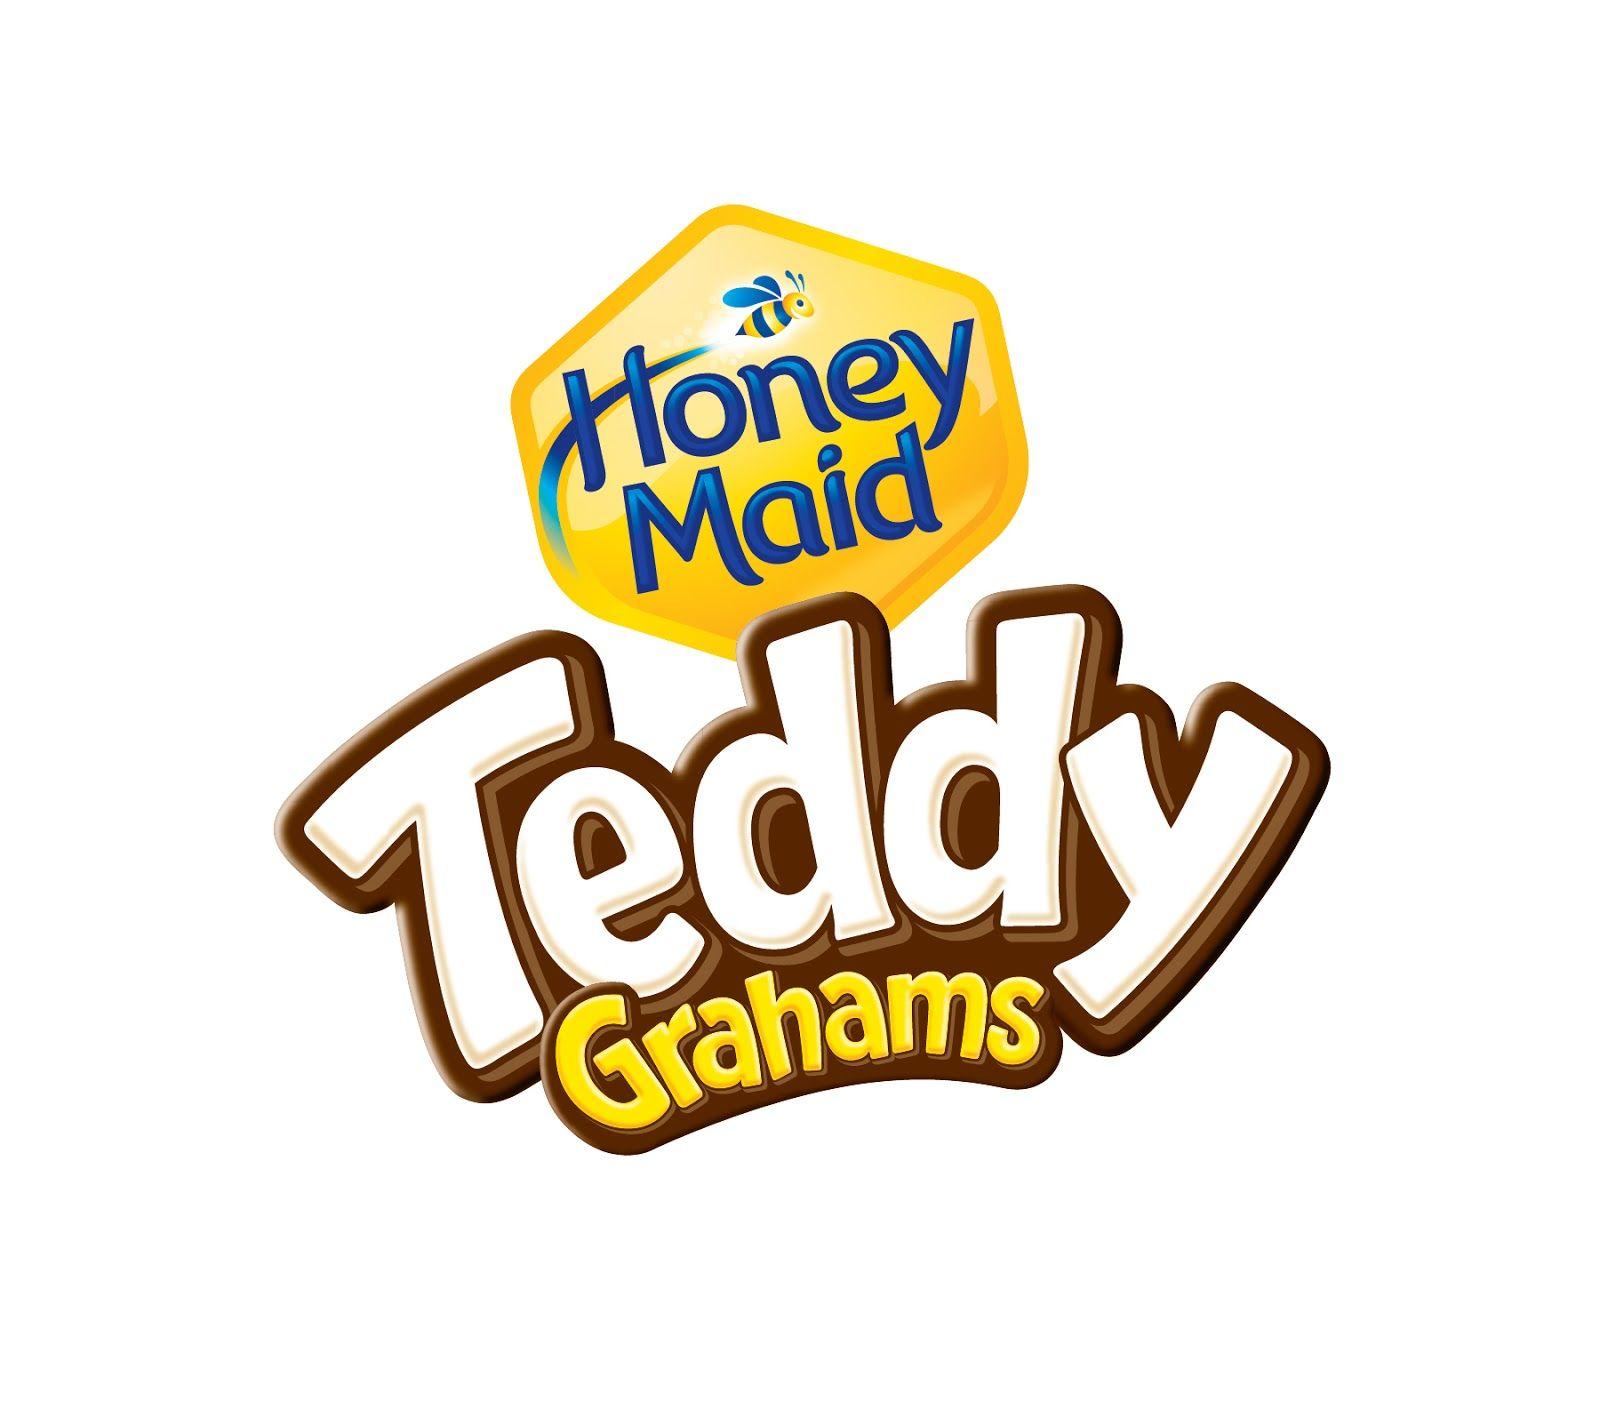 Biscuits Logo - Teddy (biscuits)